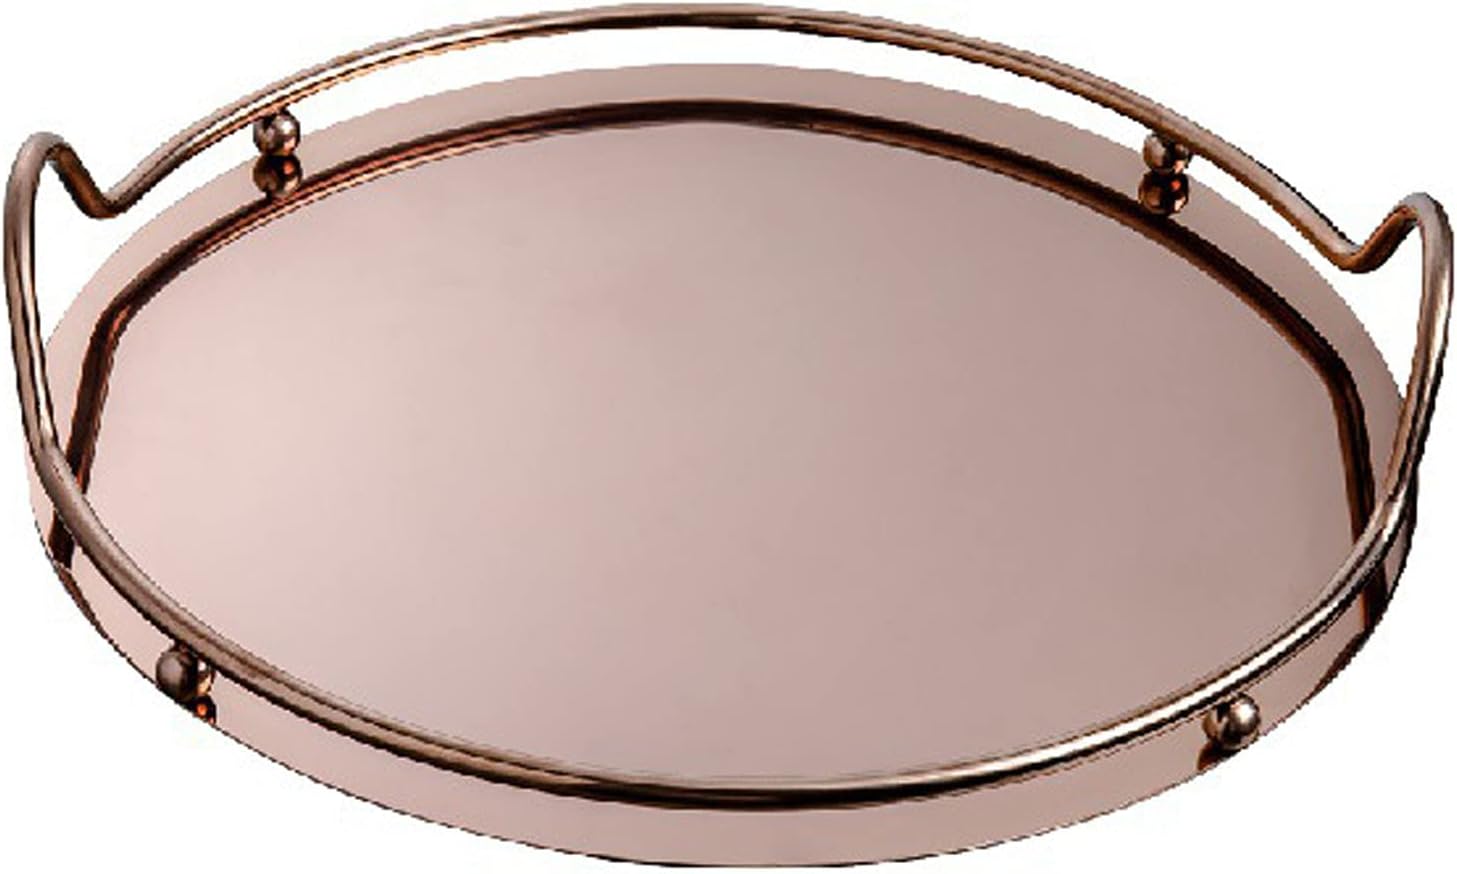 Large Round Tray With Handle Serving Trays Decorative Luxury Tea